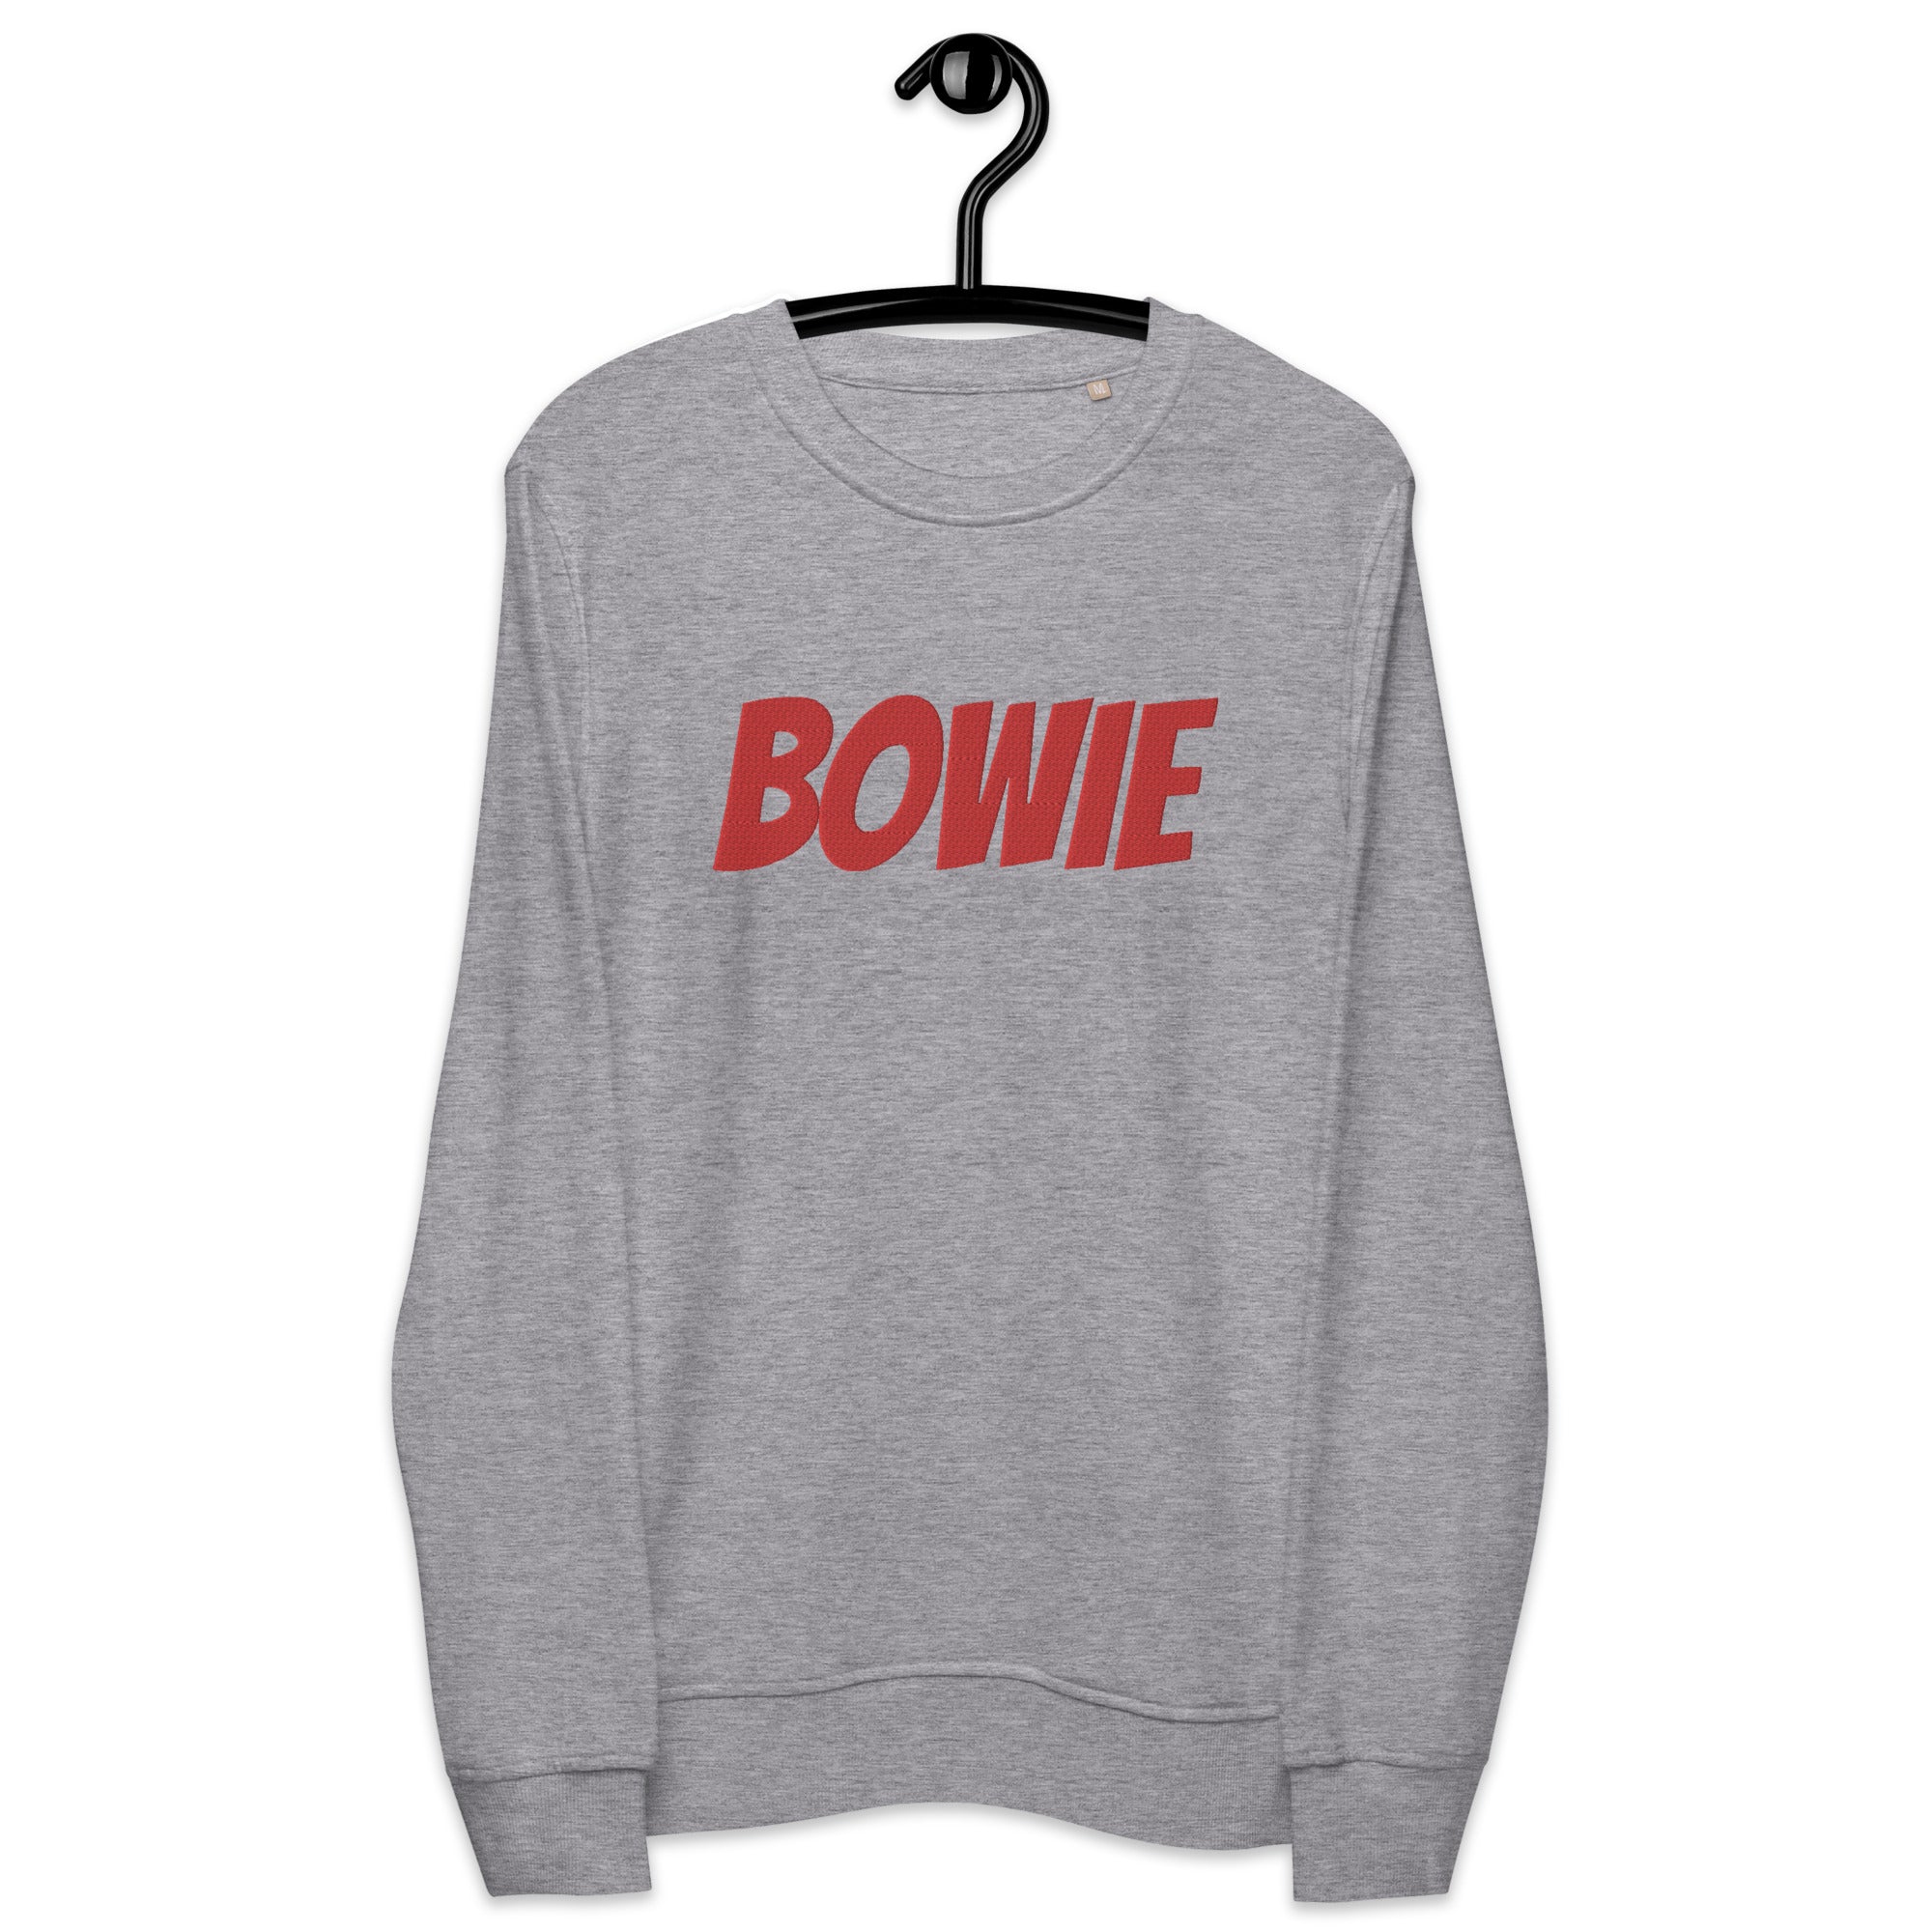 BOWIE Embroidered Unisex organic unisex sweatshirt - Red Embroidery (inspired by David Bowie)